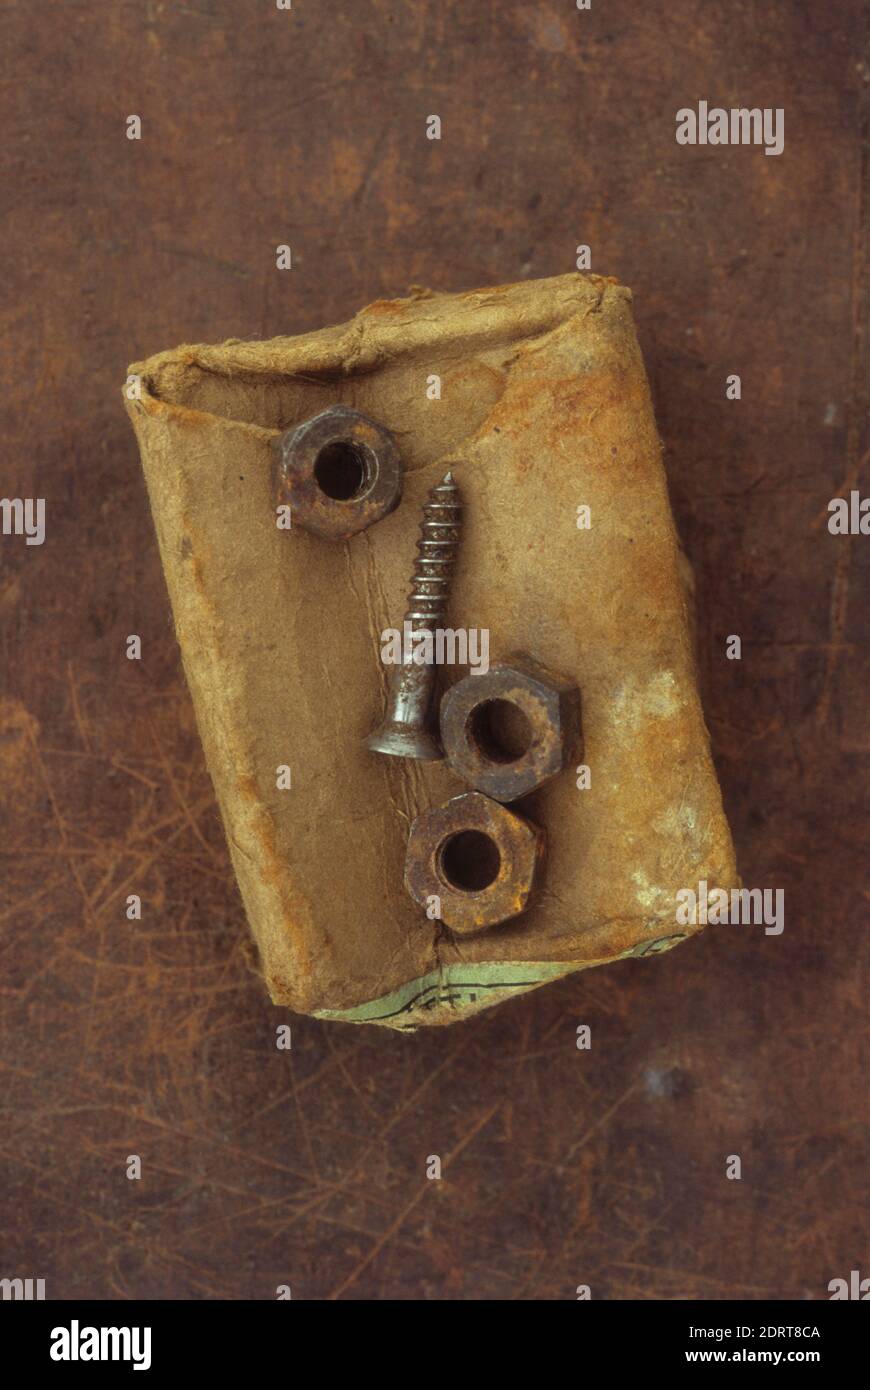 Old crumpled rust-stained cardboard box with three rusty metal nuts and used screw lying on top Stock Photo